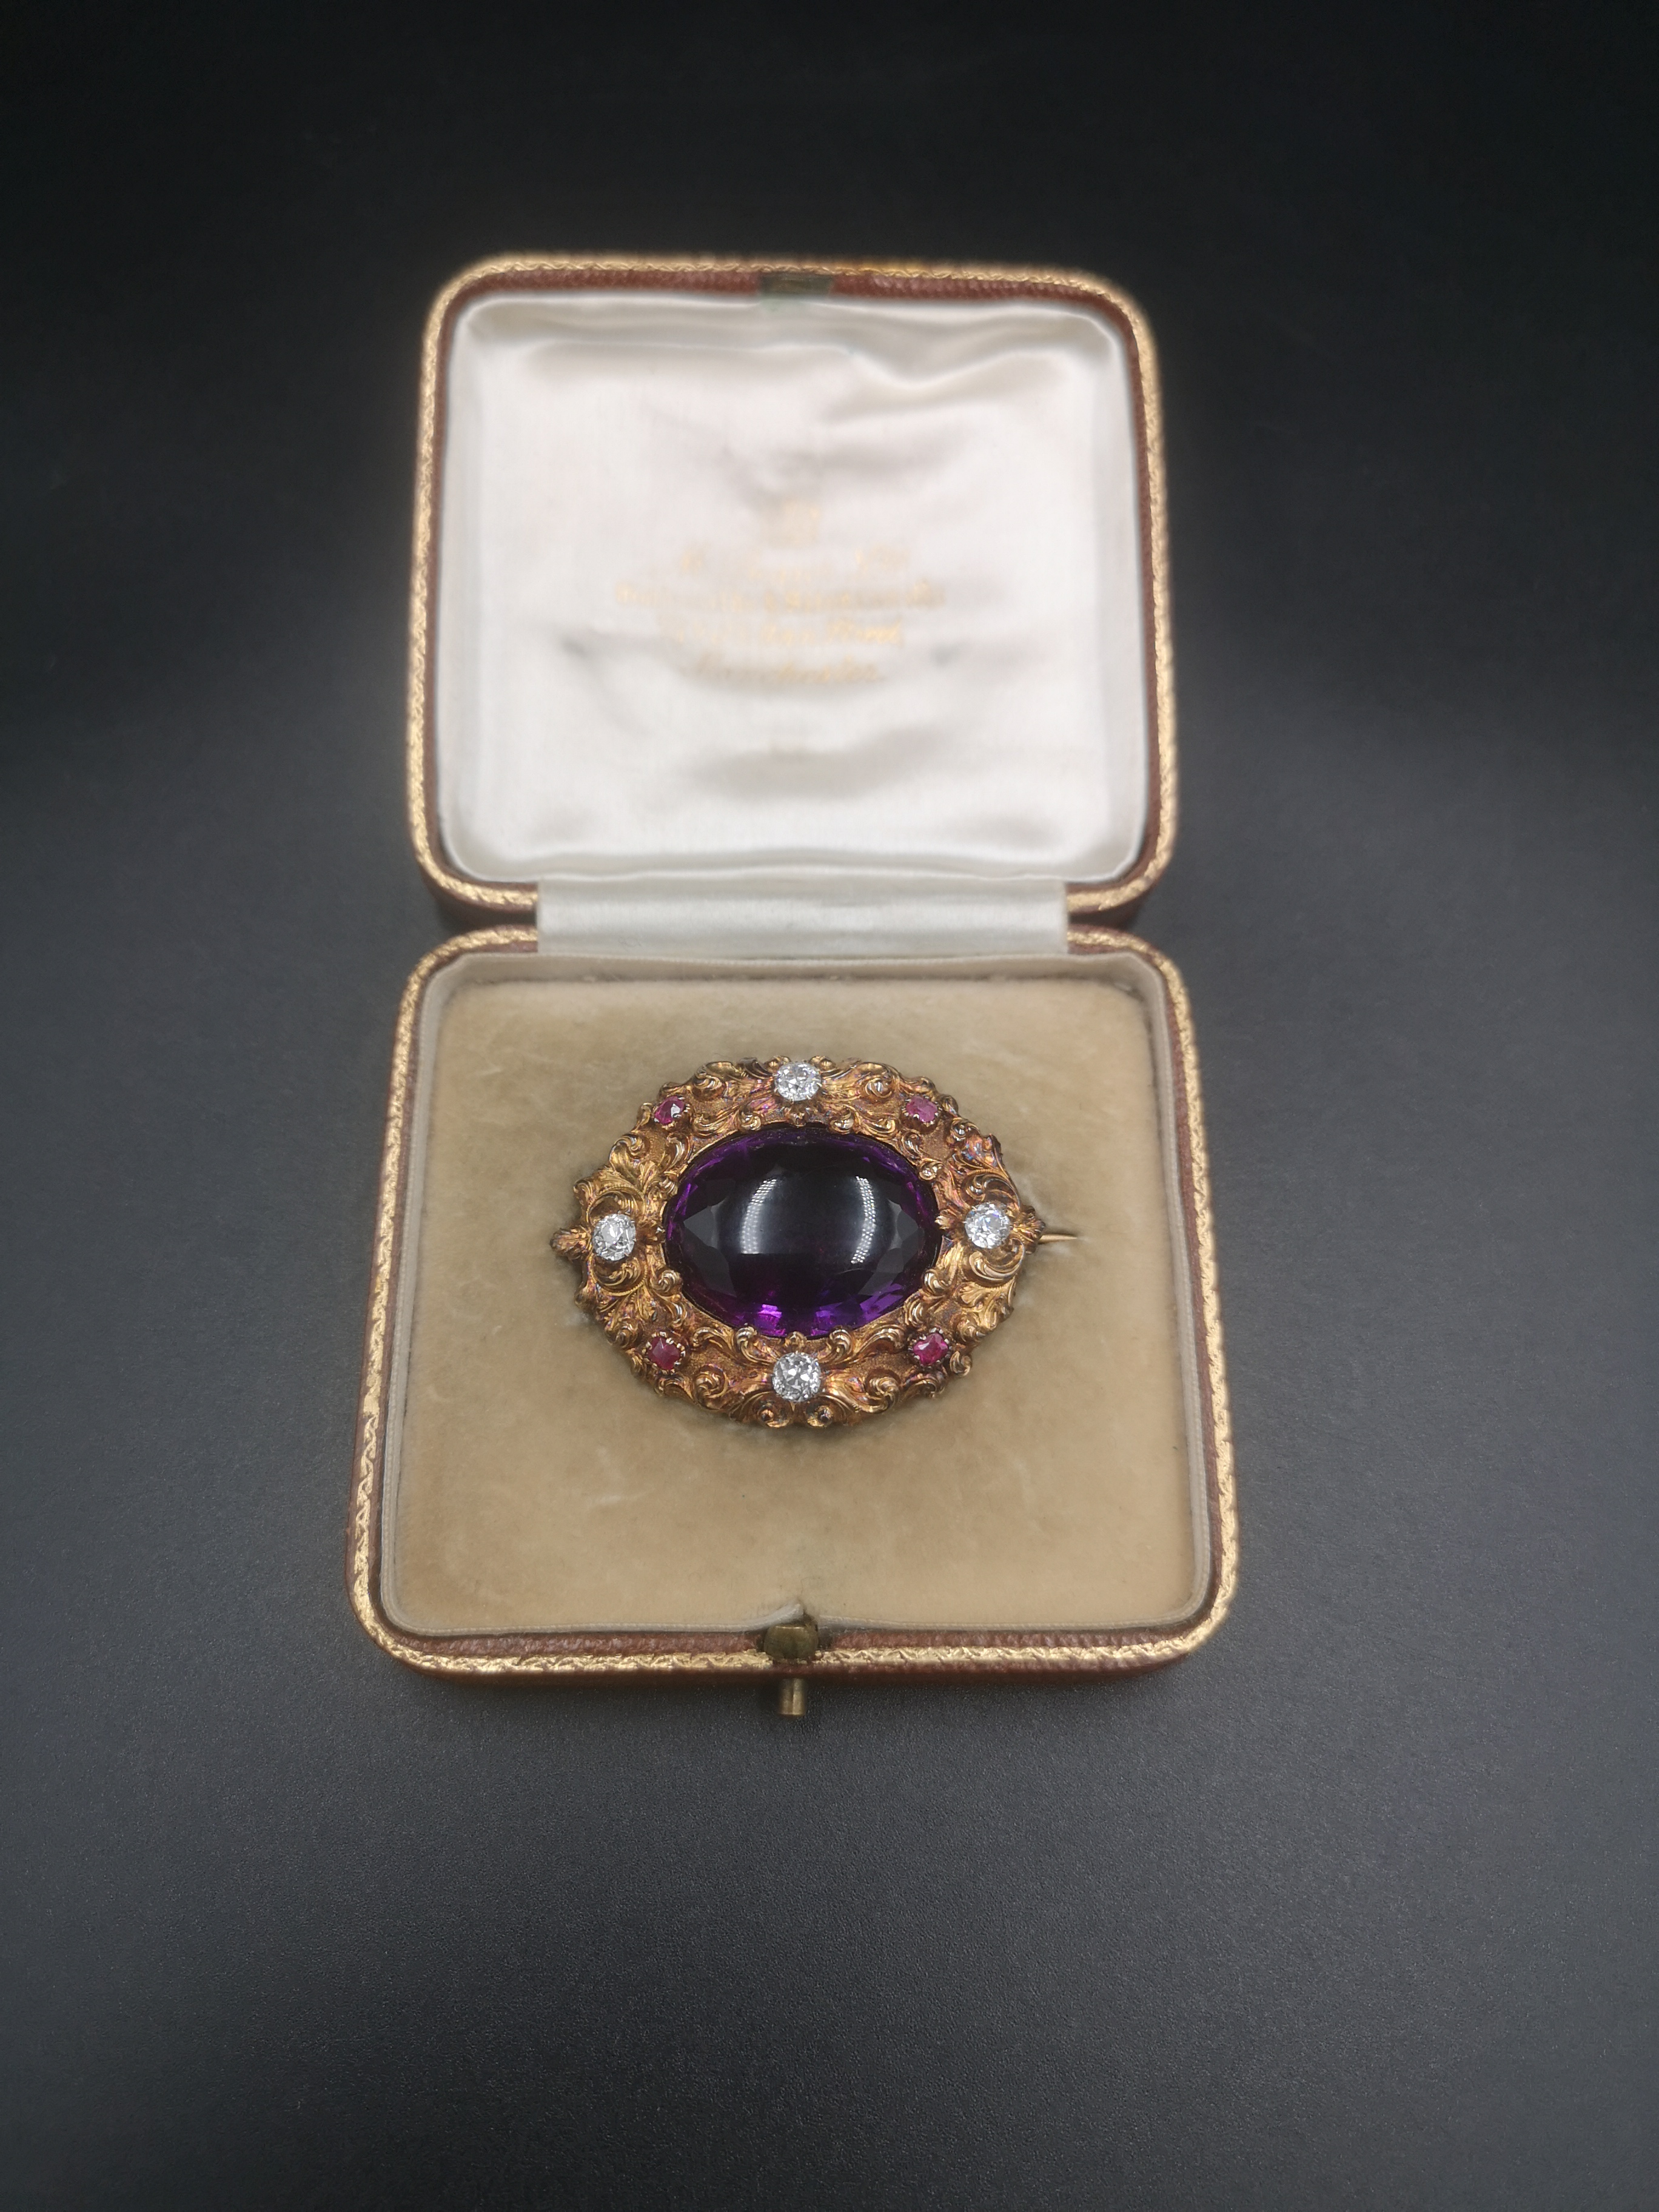 Brooch set with amethyst, diamonds and rubies - Image 2 of 4